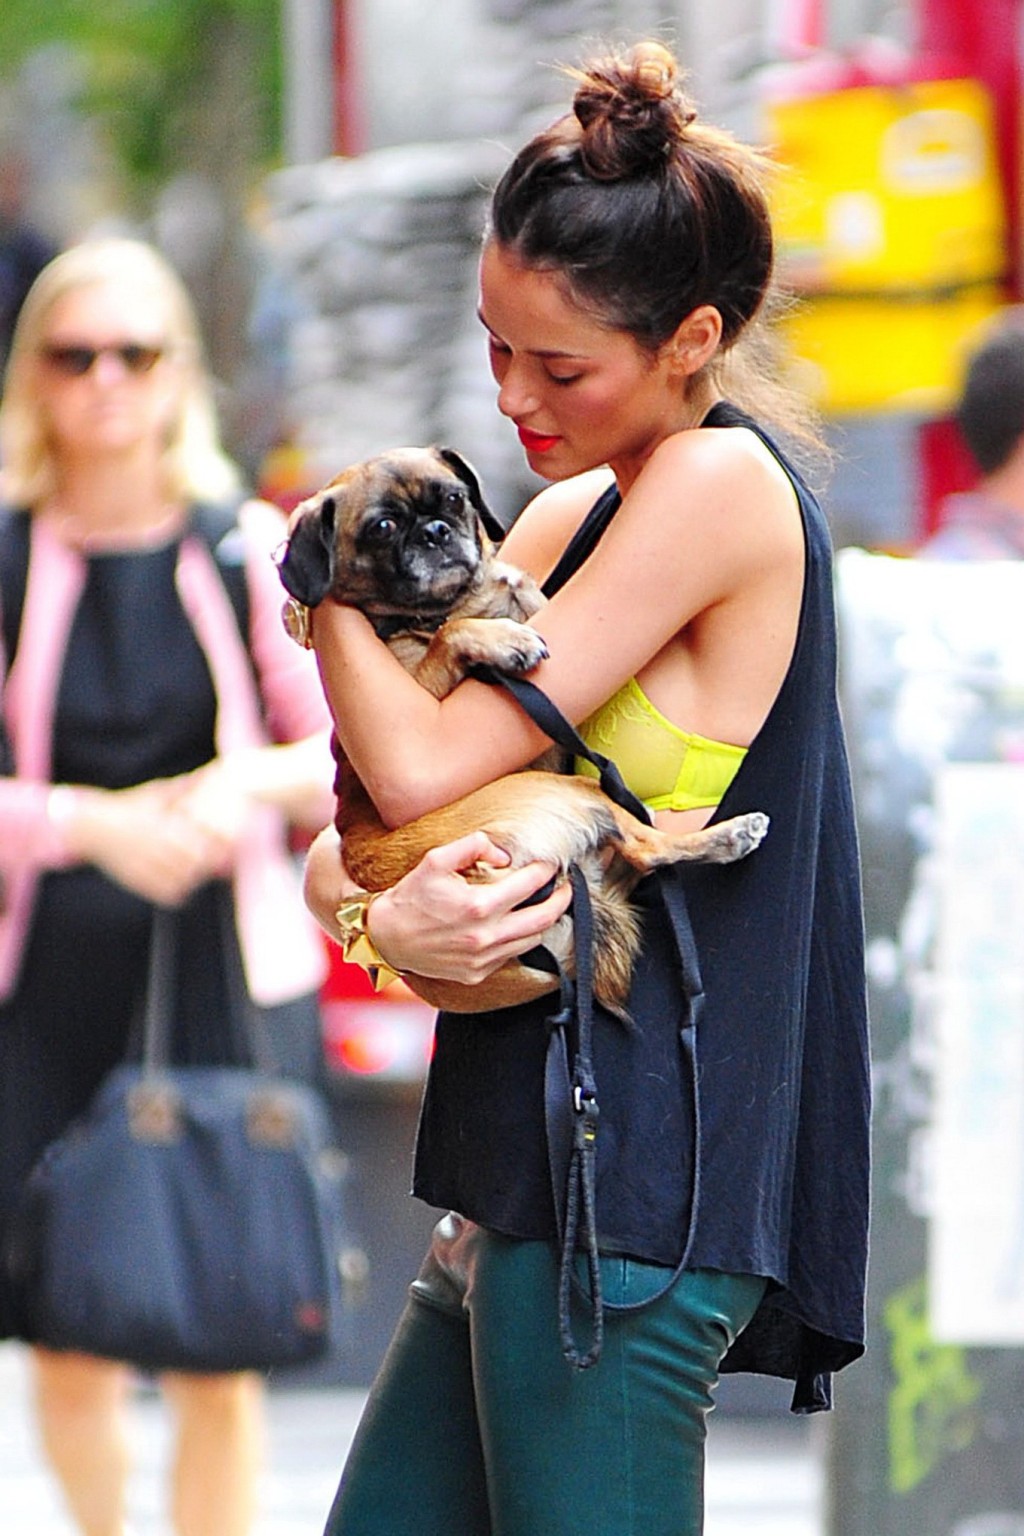 Nicole Trunfio bra peak while petting her doggy out in Soho #75250616